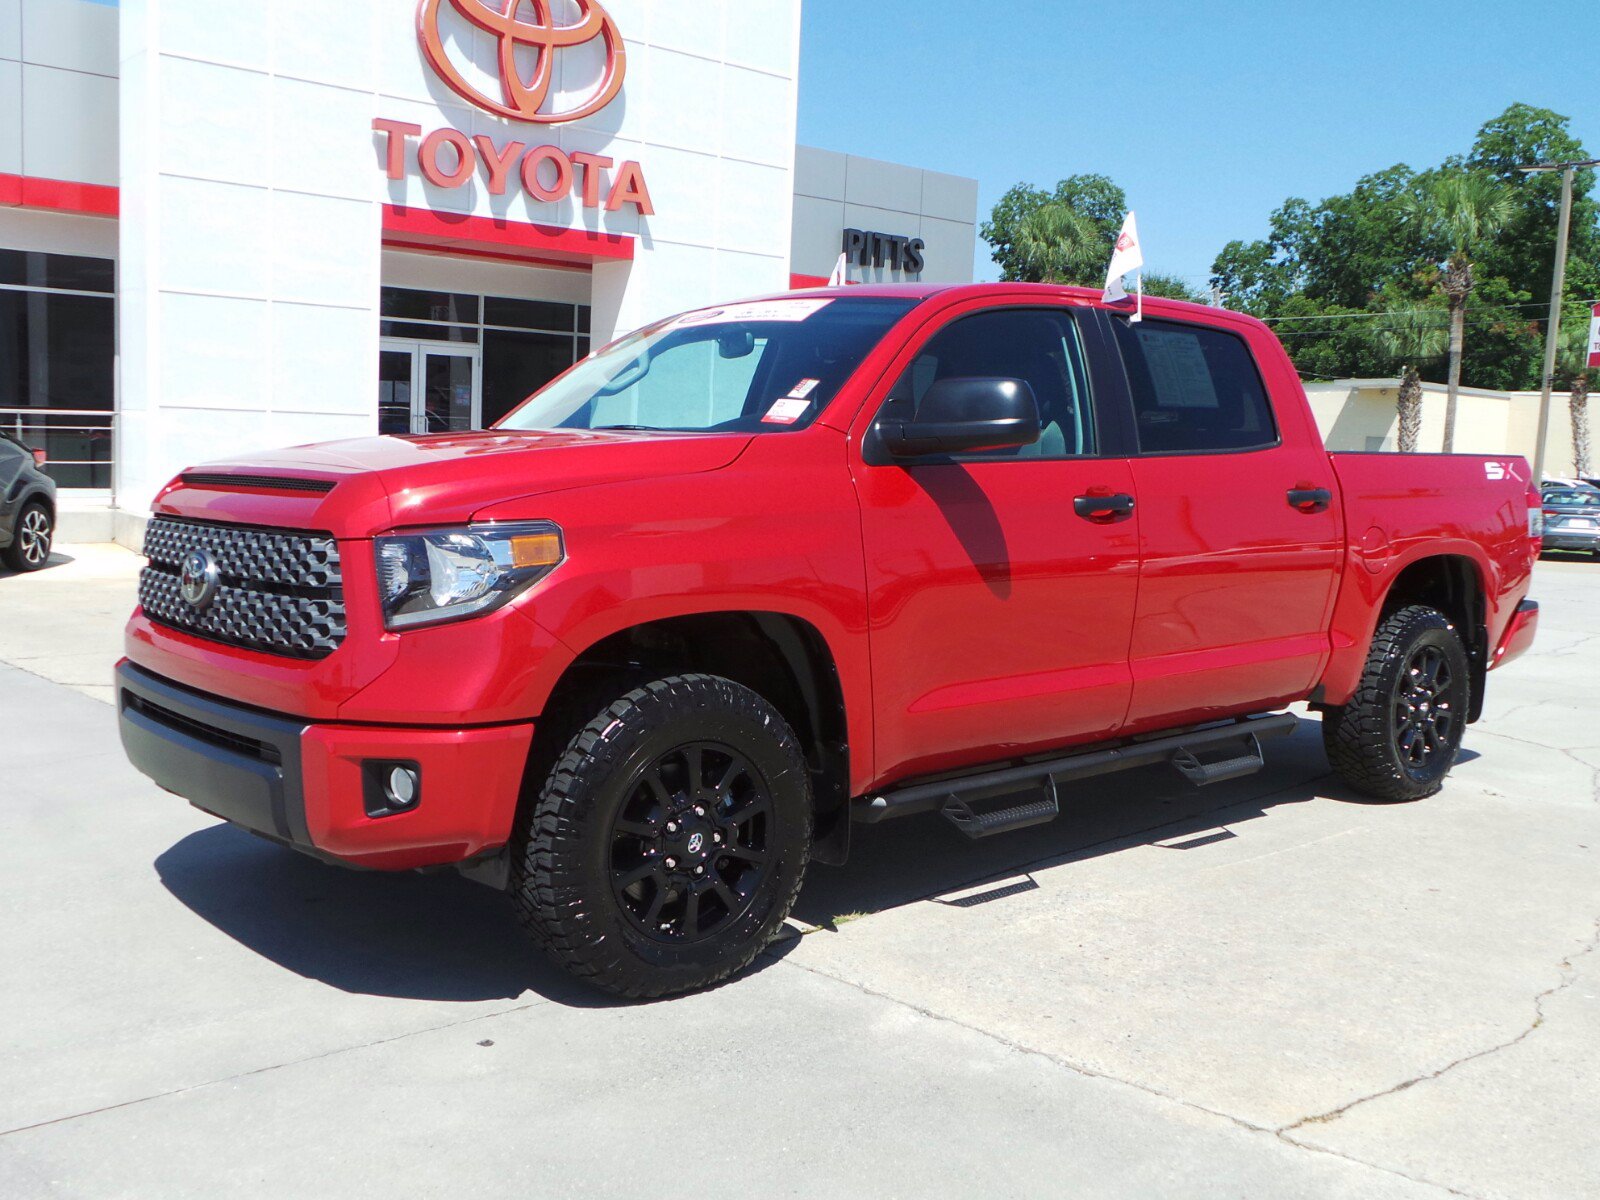 Certified Pre-Owned 2020 Toyota Tundra 4WD SR5 CrewMax in Dublin #96370